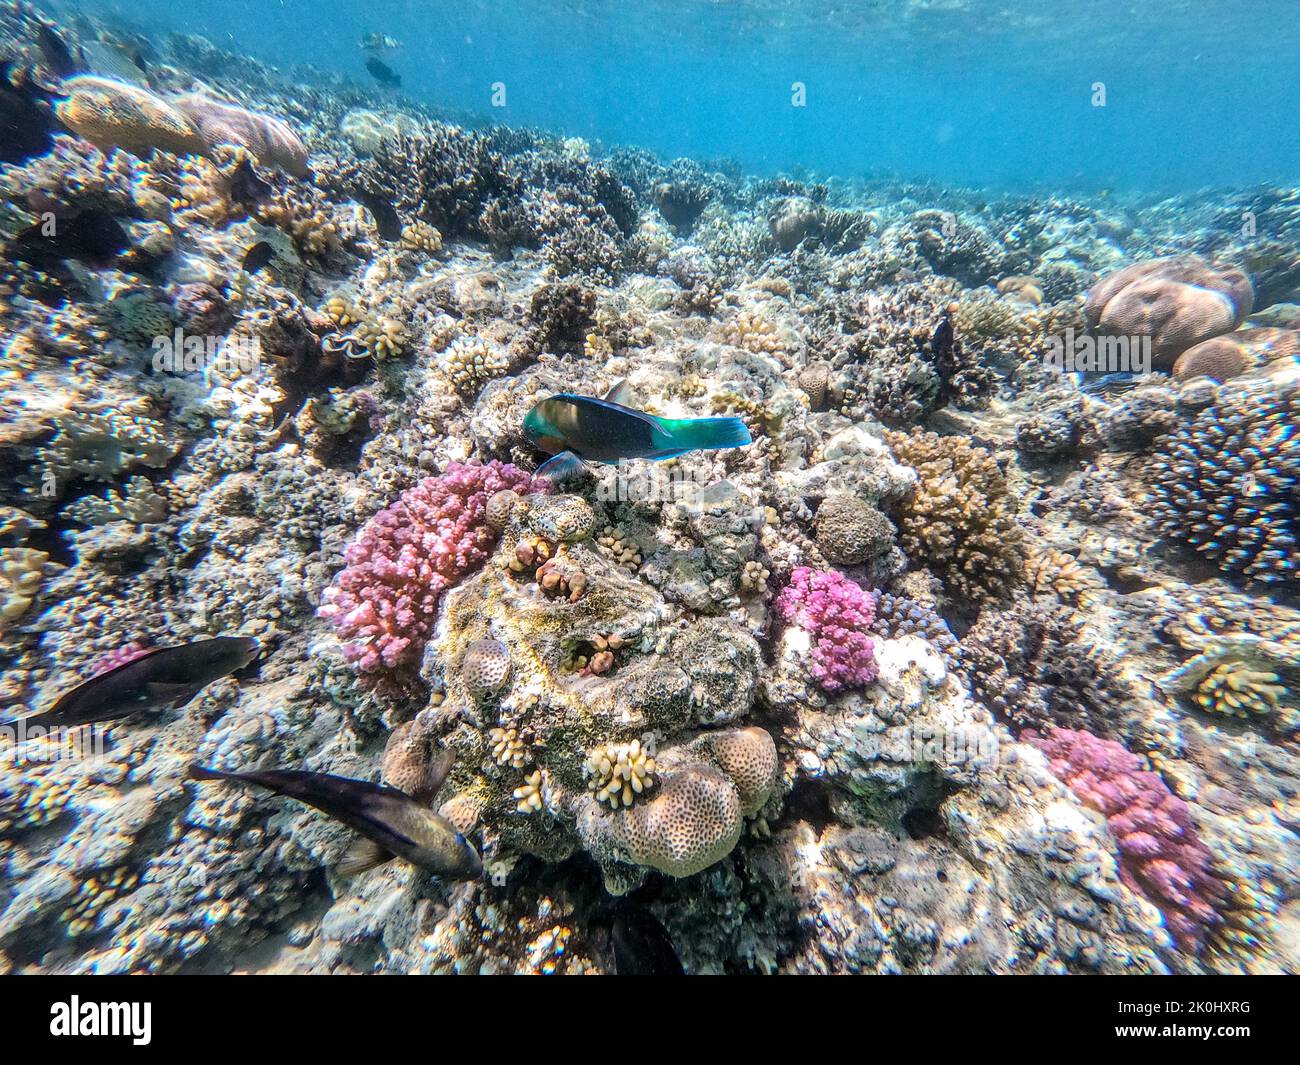 Colorful tropical Hipposcarus longiceps or Longnose Parrotfish known as Hipposcarus Harid underwater at the coral reef. Underwater life of reef with c Stock Photo